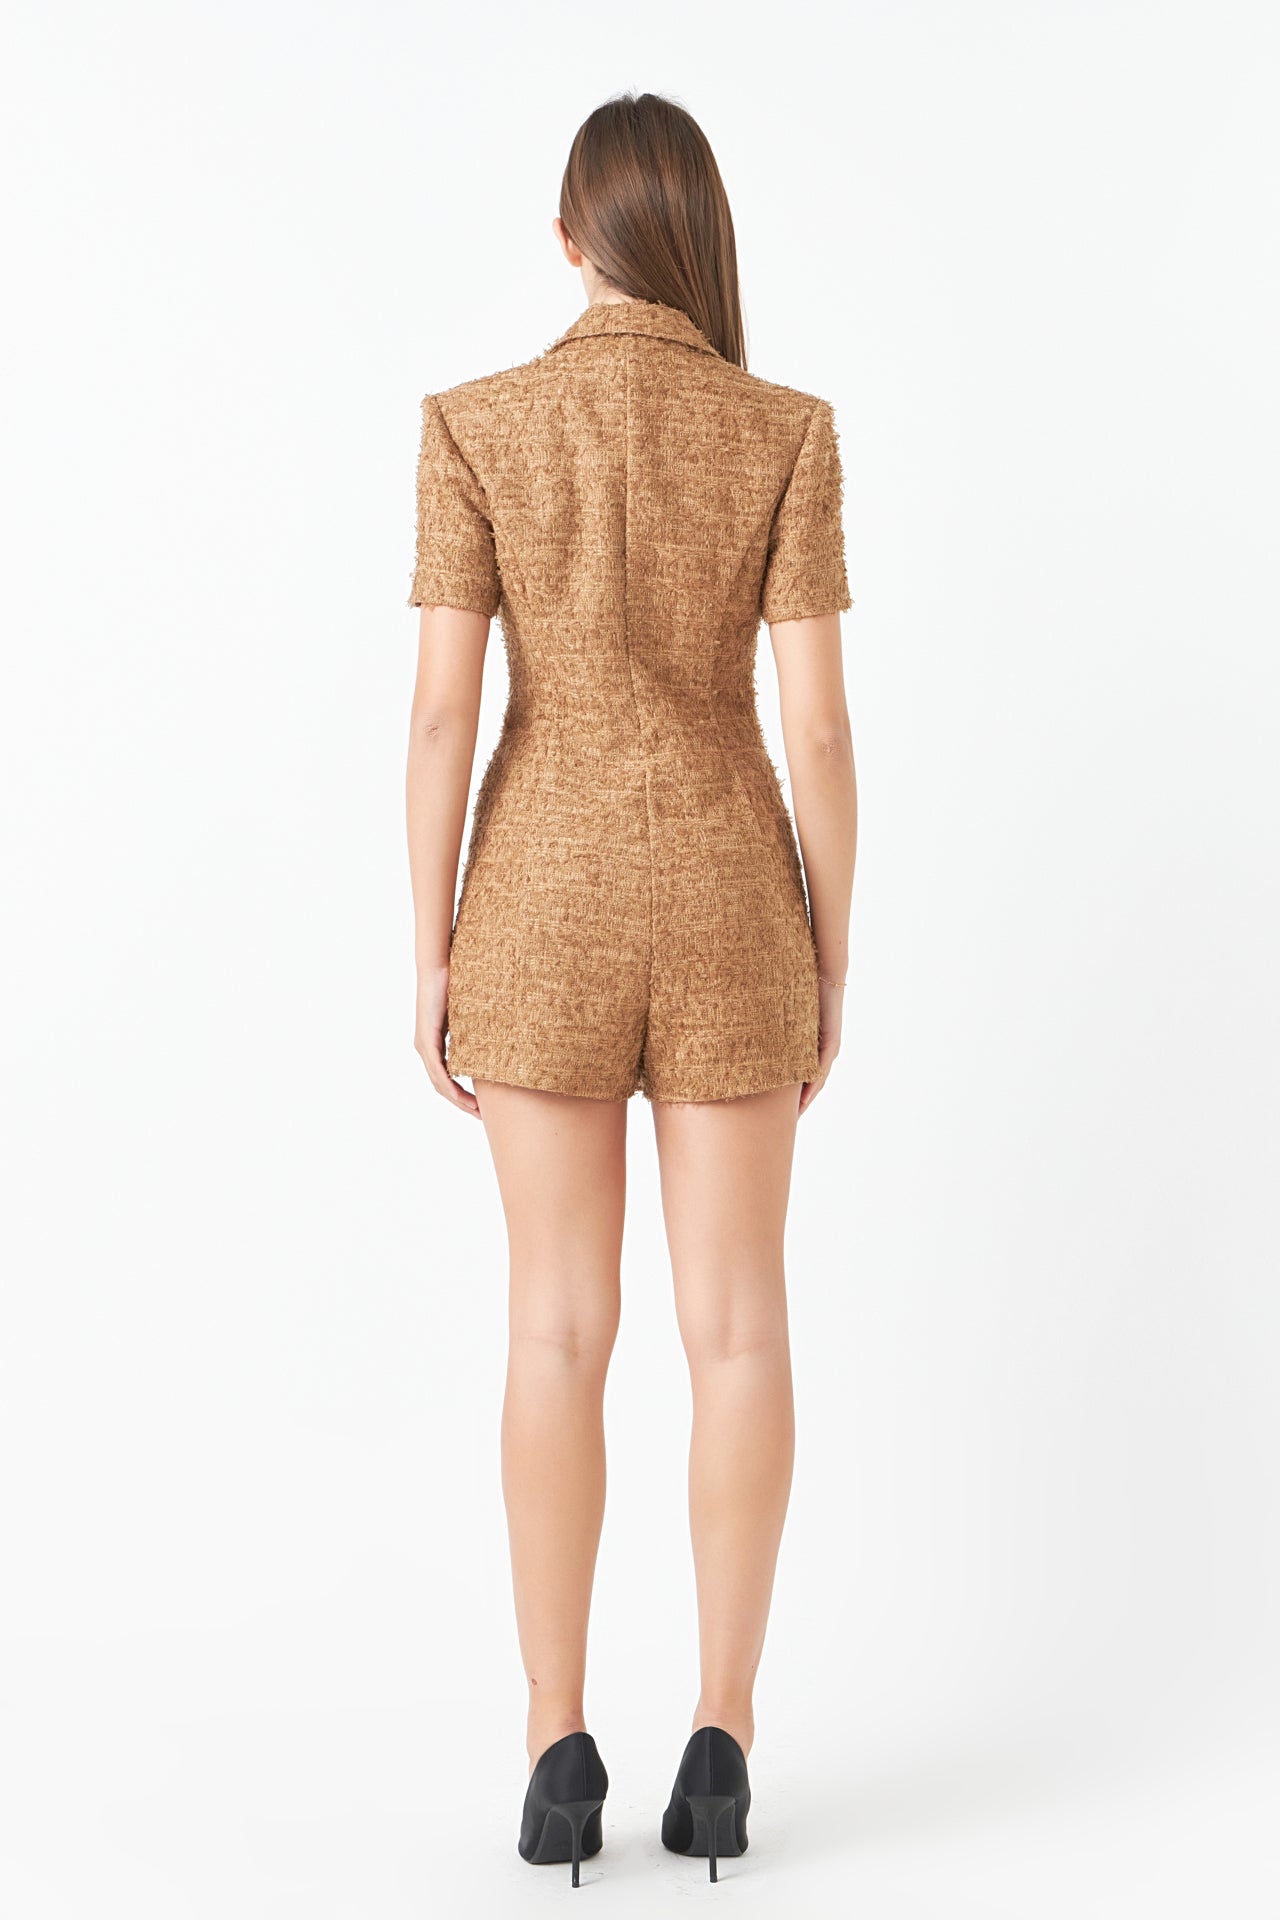 ENDLESS ROSE - Short Sleeve Tweed Romper - ROMPERS available at Objectrare